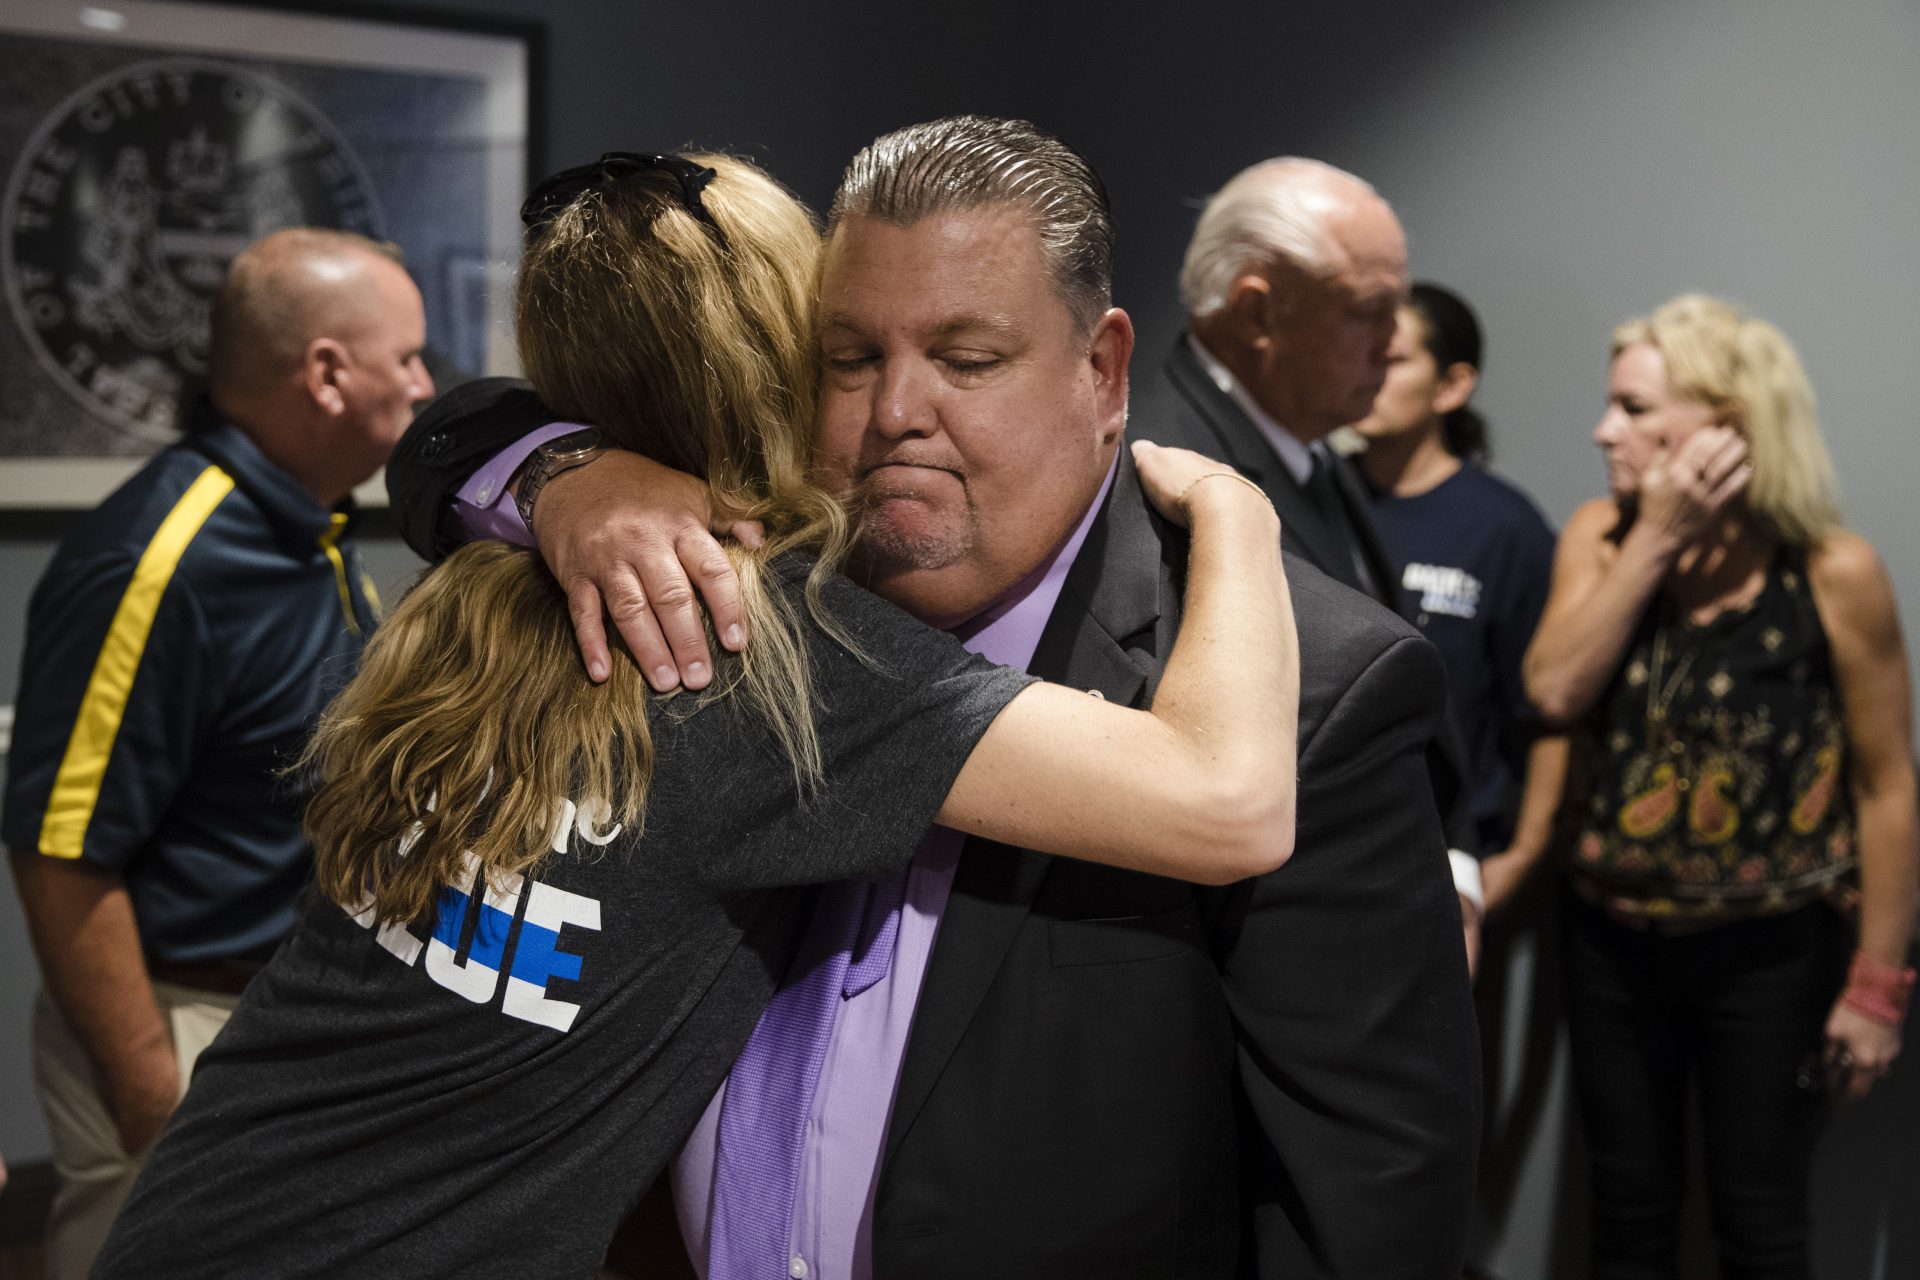 Police union President John McNesby embraces former Officer Ryan Pownall's wife Tina after a news conference in Philadelphia, Tuesday, Sept. 4, 2018.